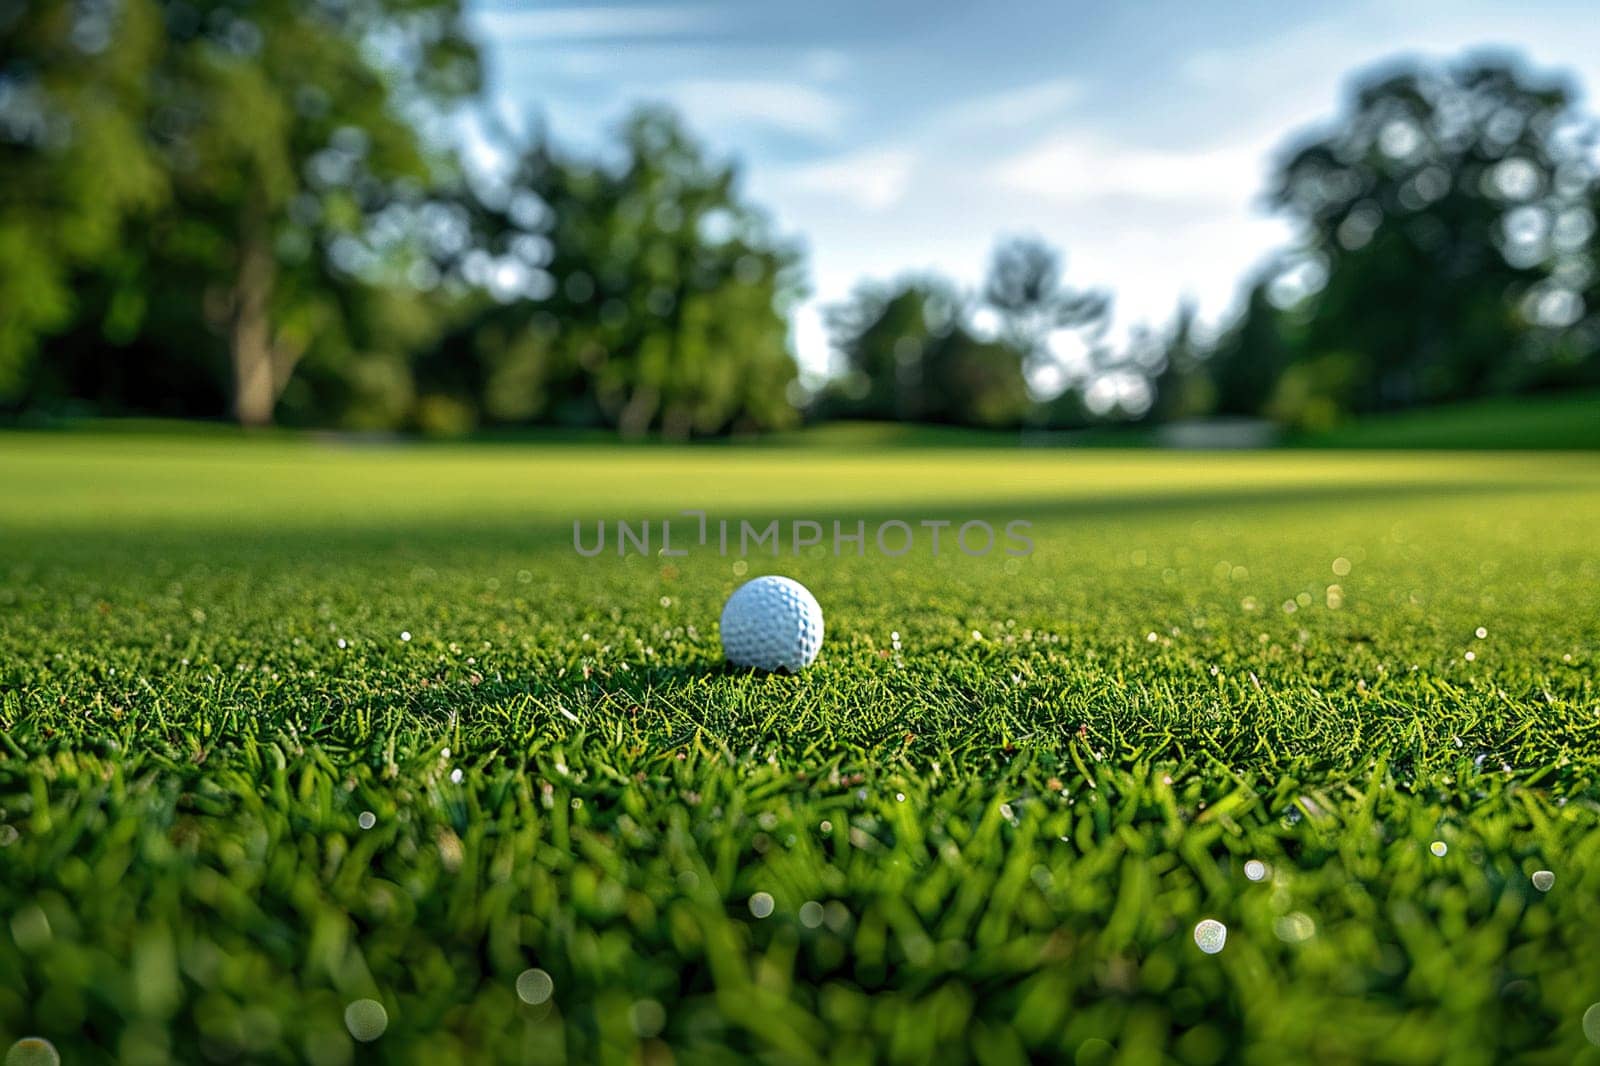 Field with green lawn and white golf ball. Golf game concept.